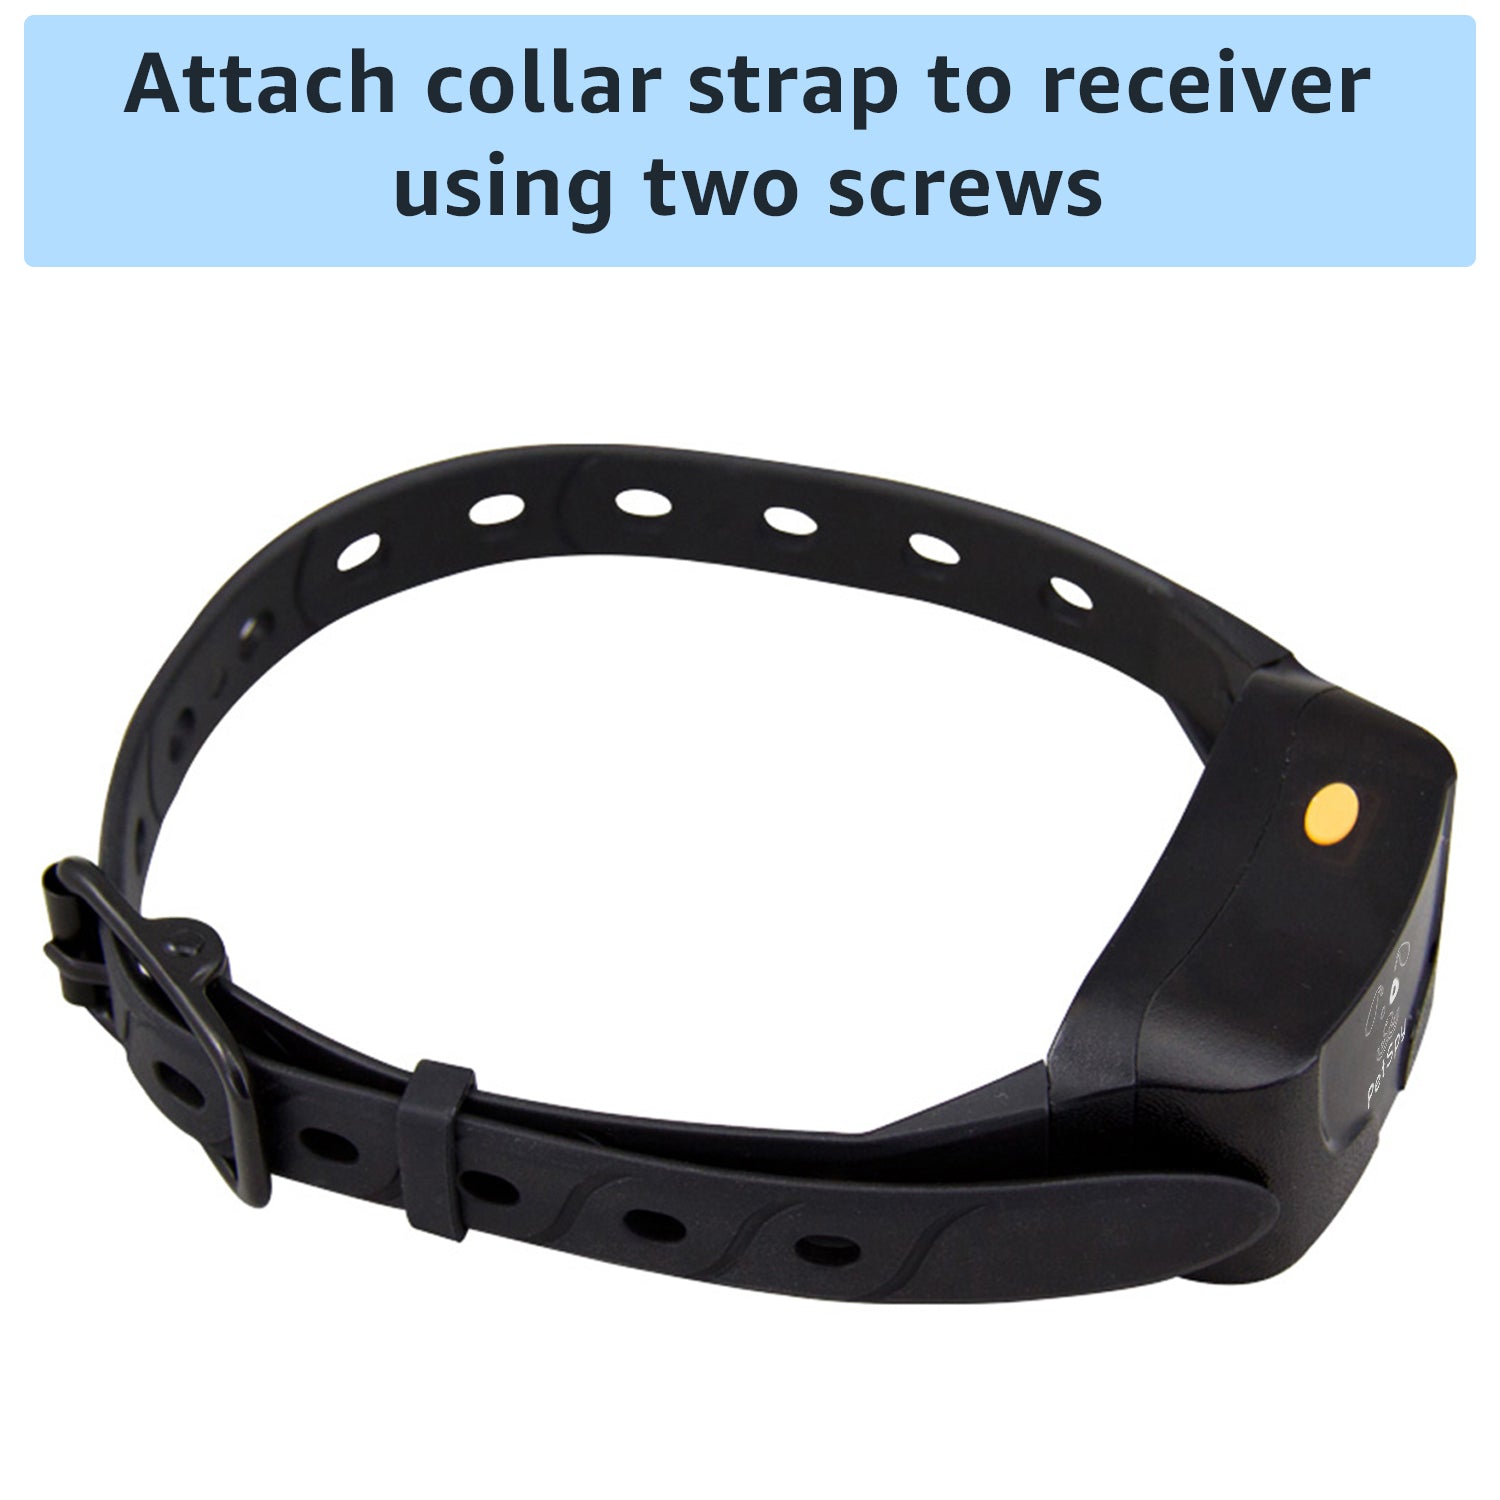 Attach collar strap to receiver using two screws